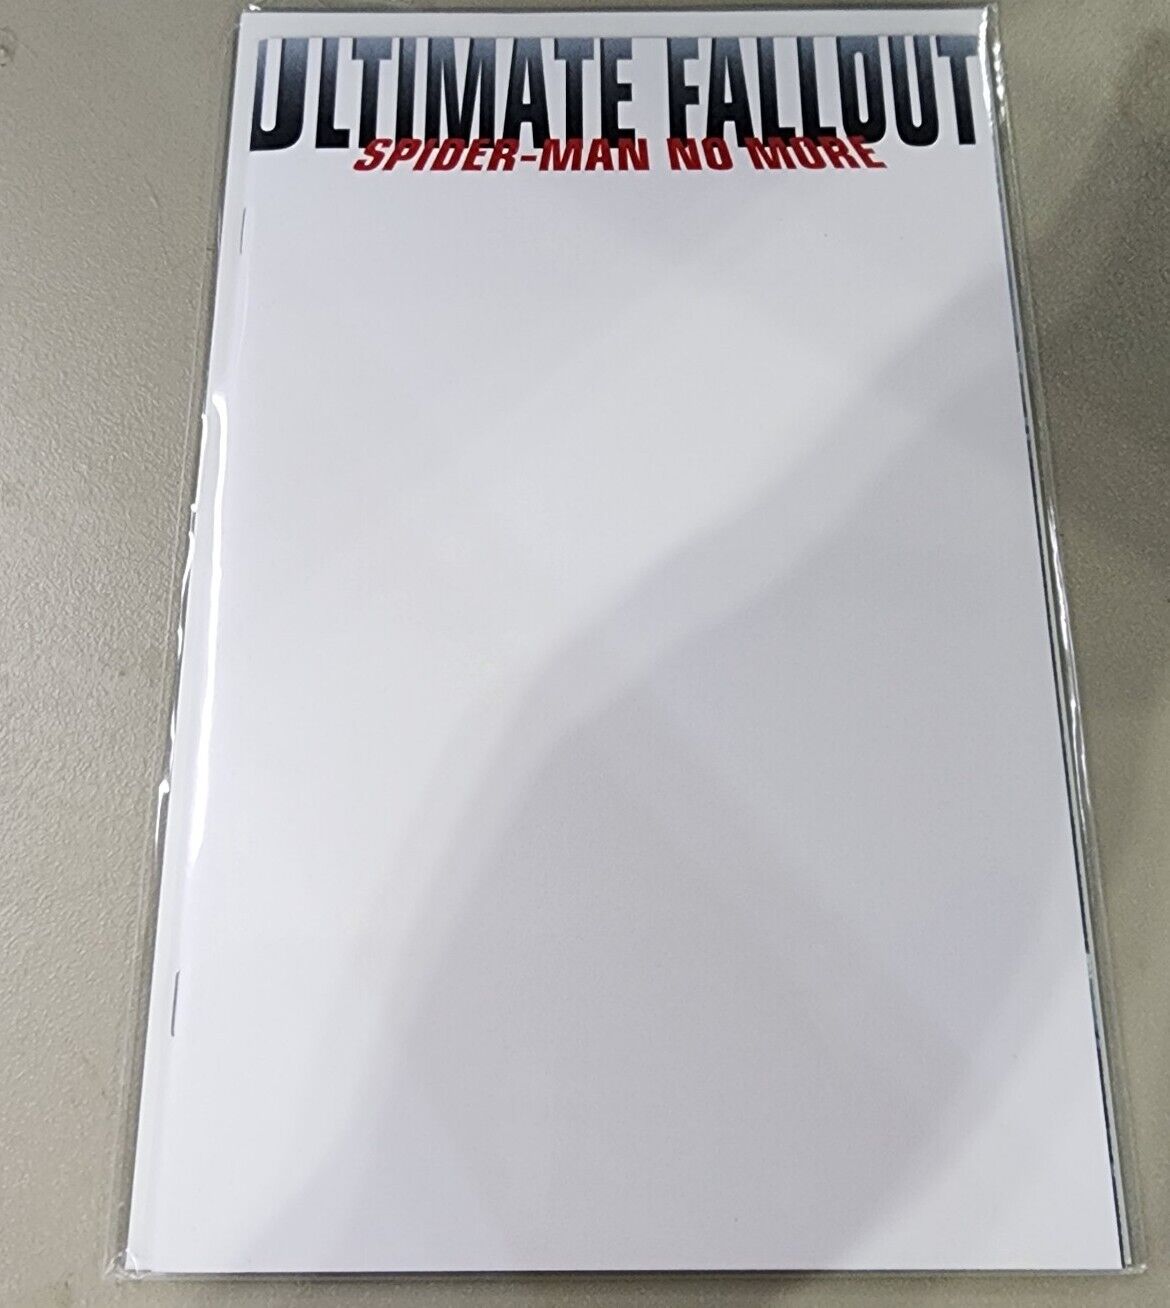 Ultimate Fallout #4 Comic Blank Sketch Cover Variant